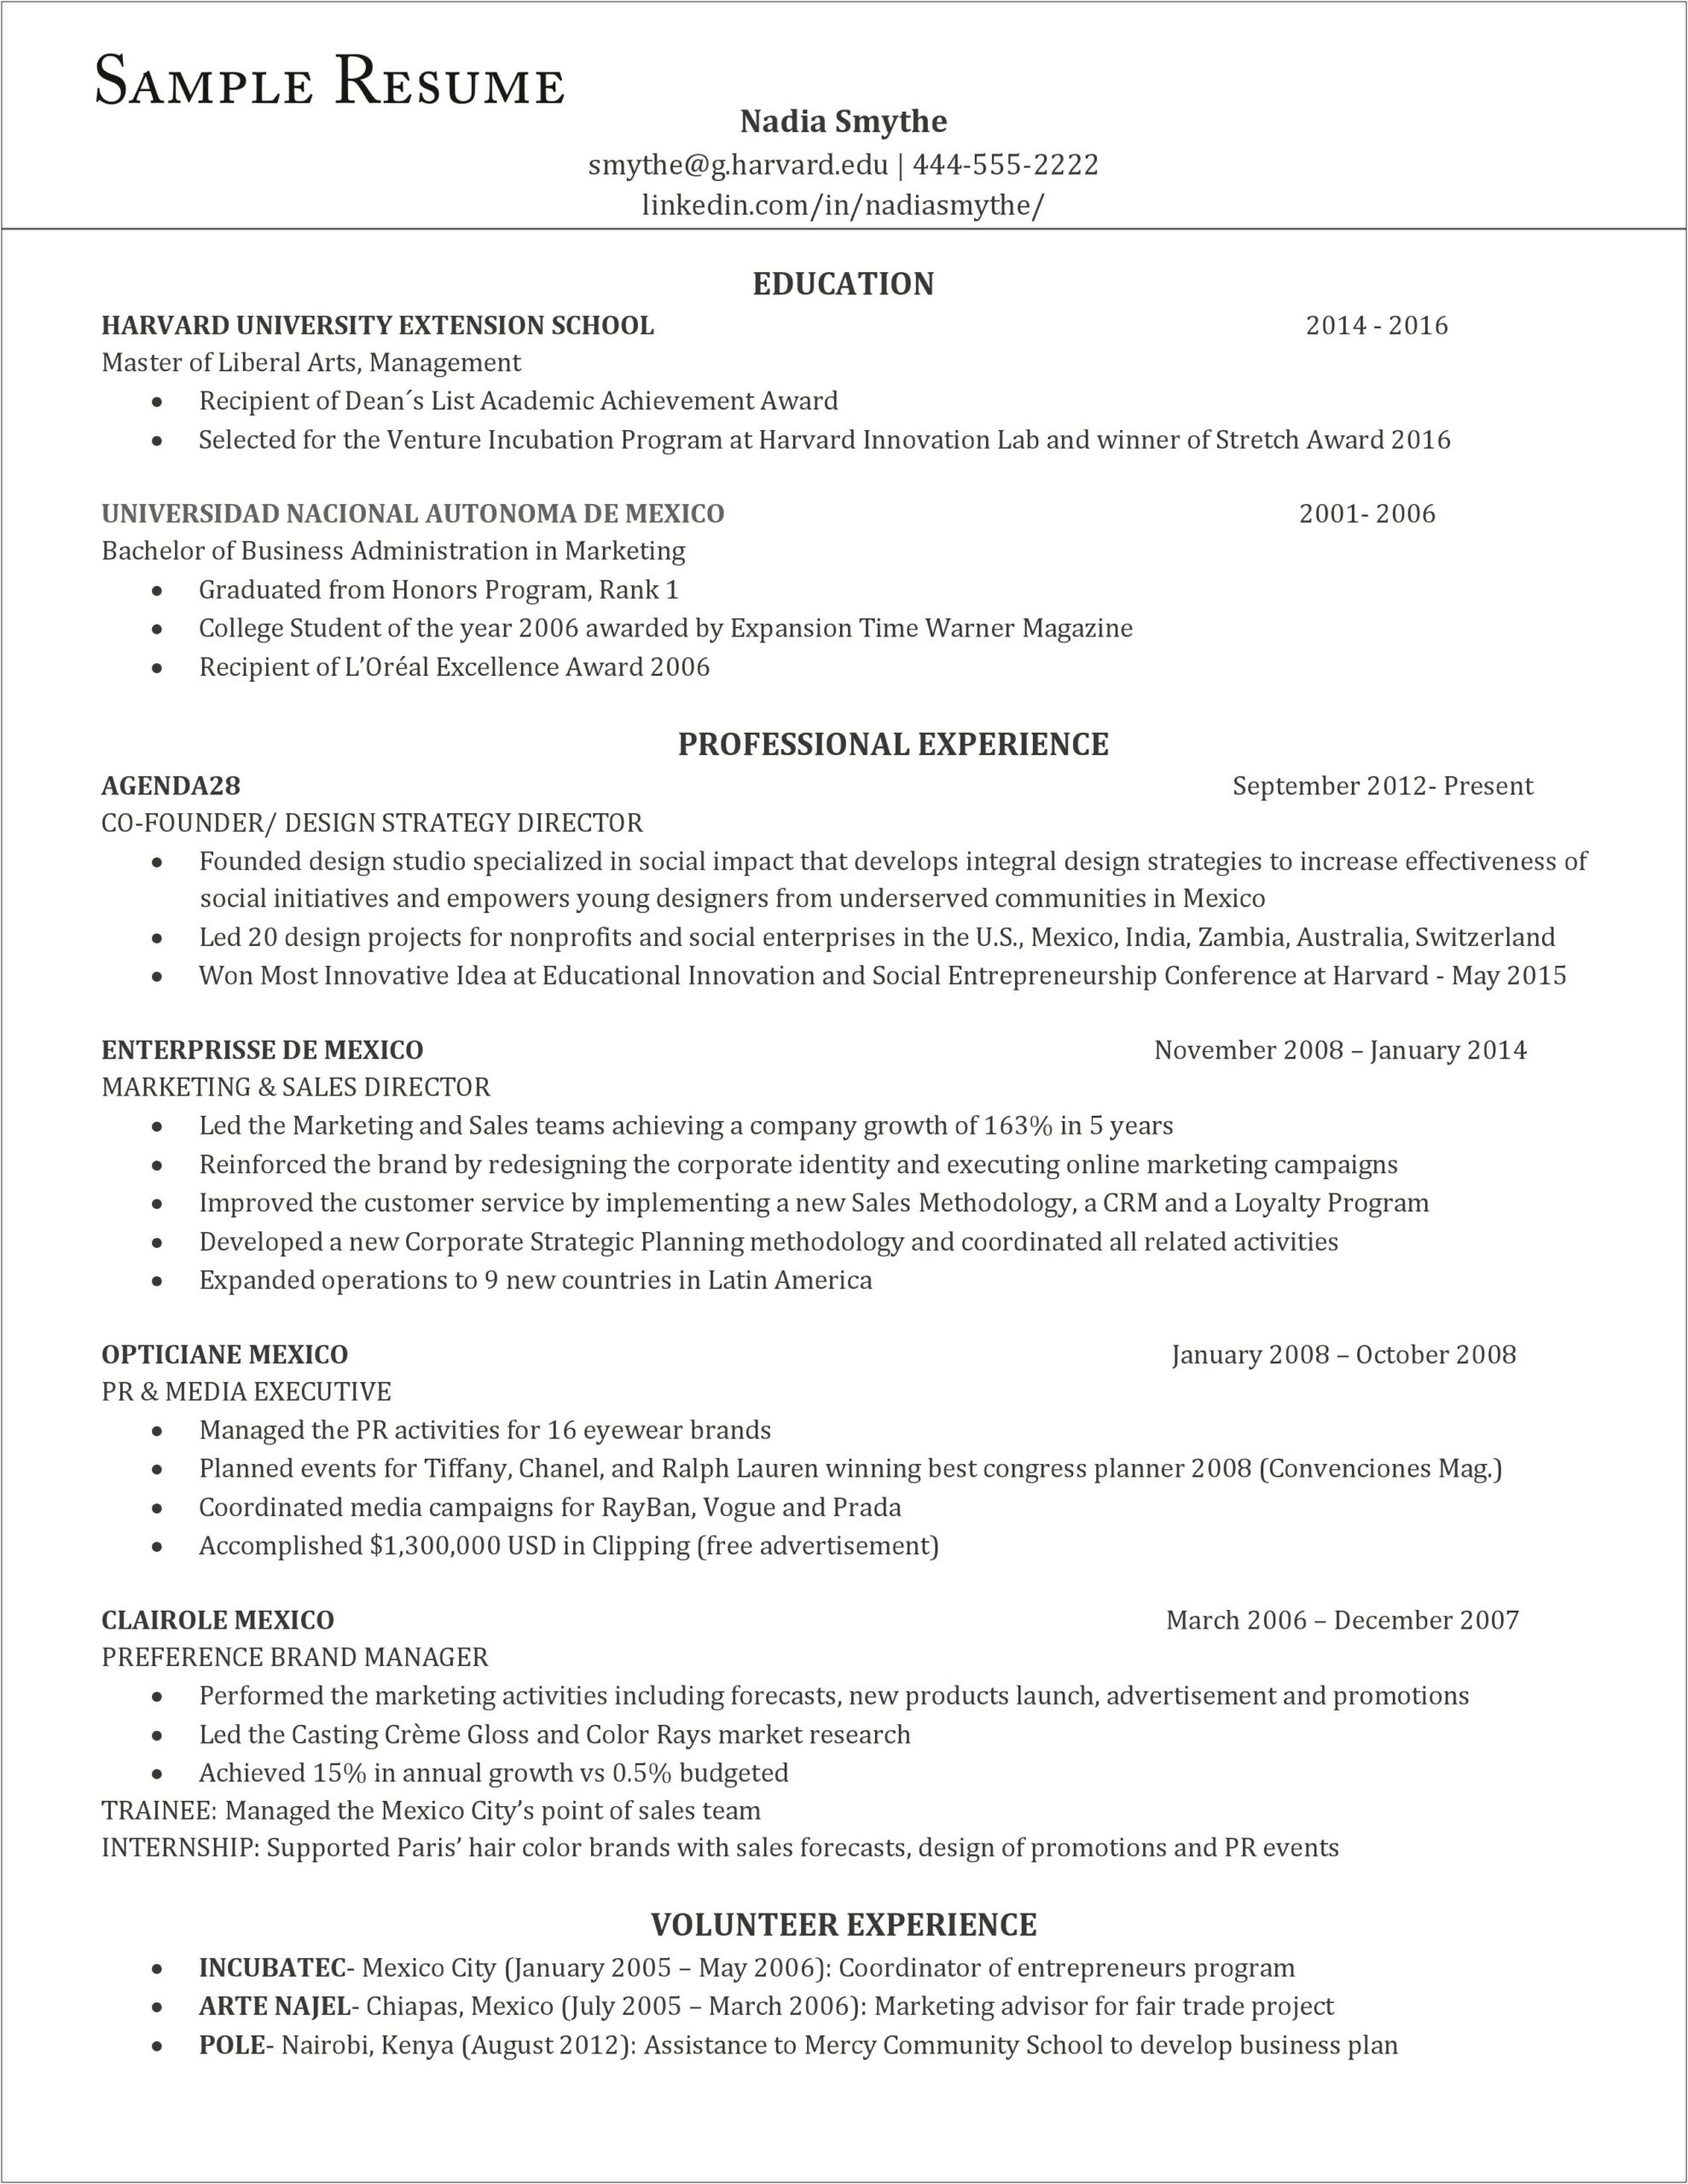 Resume With One Job Over 15 Years